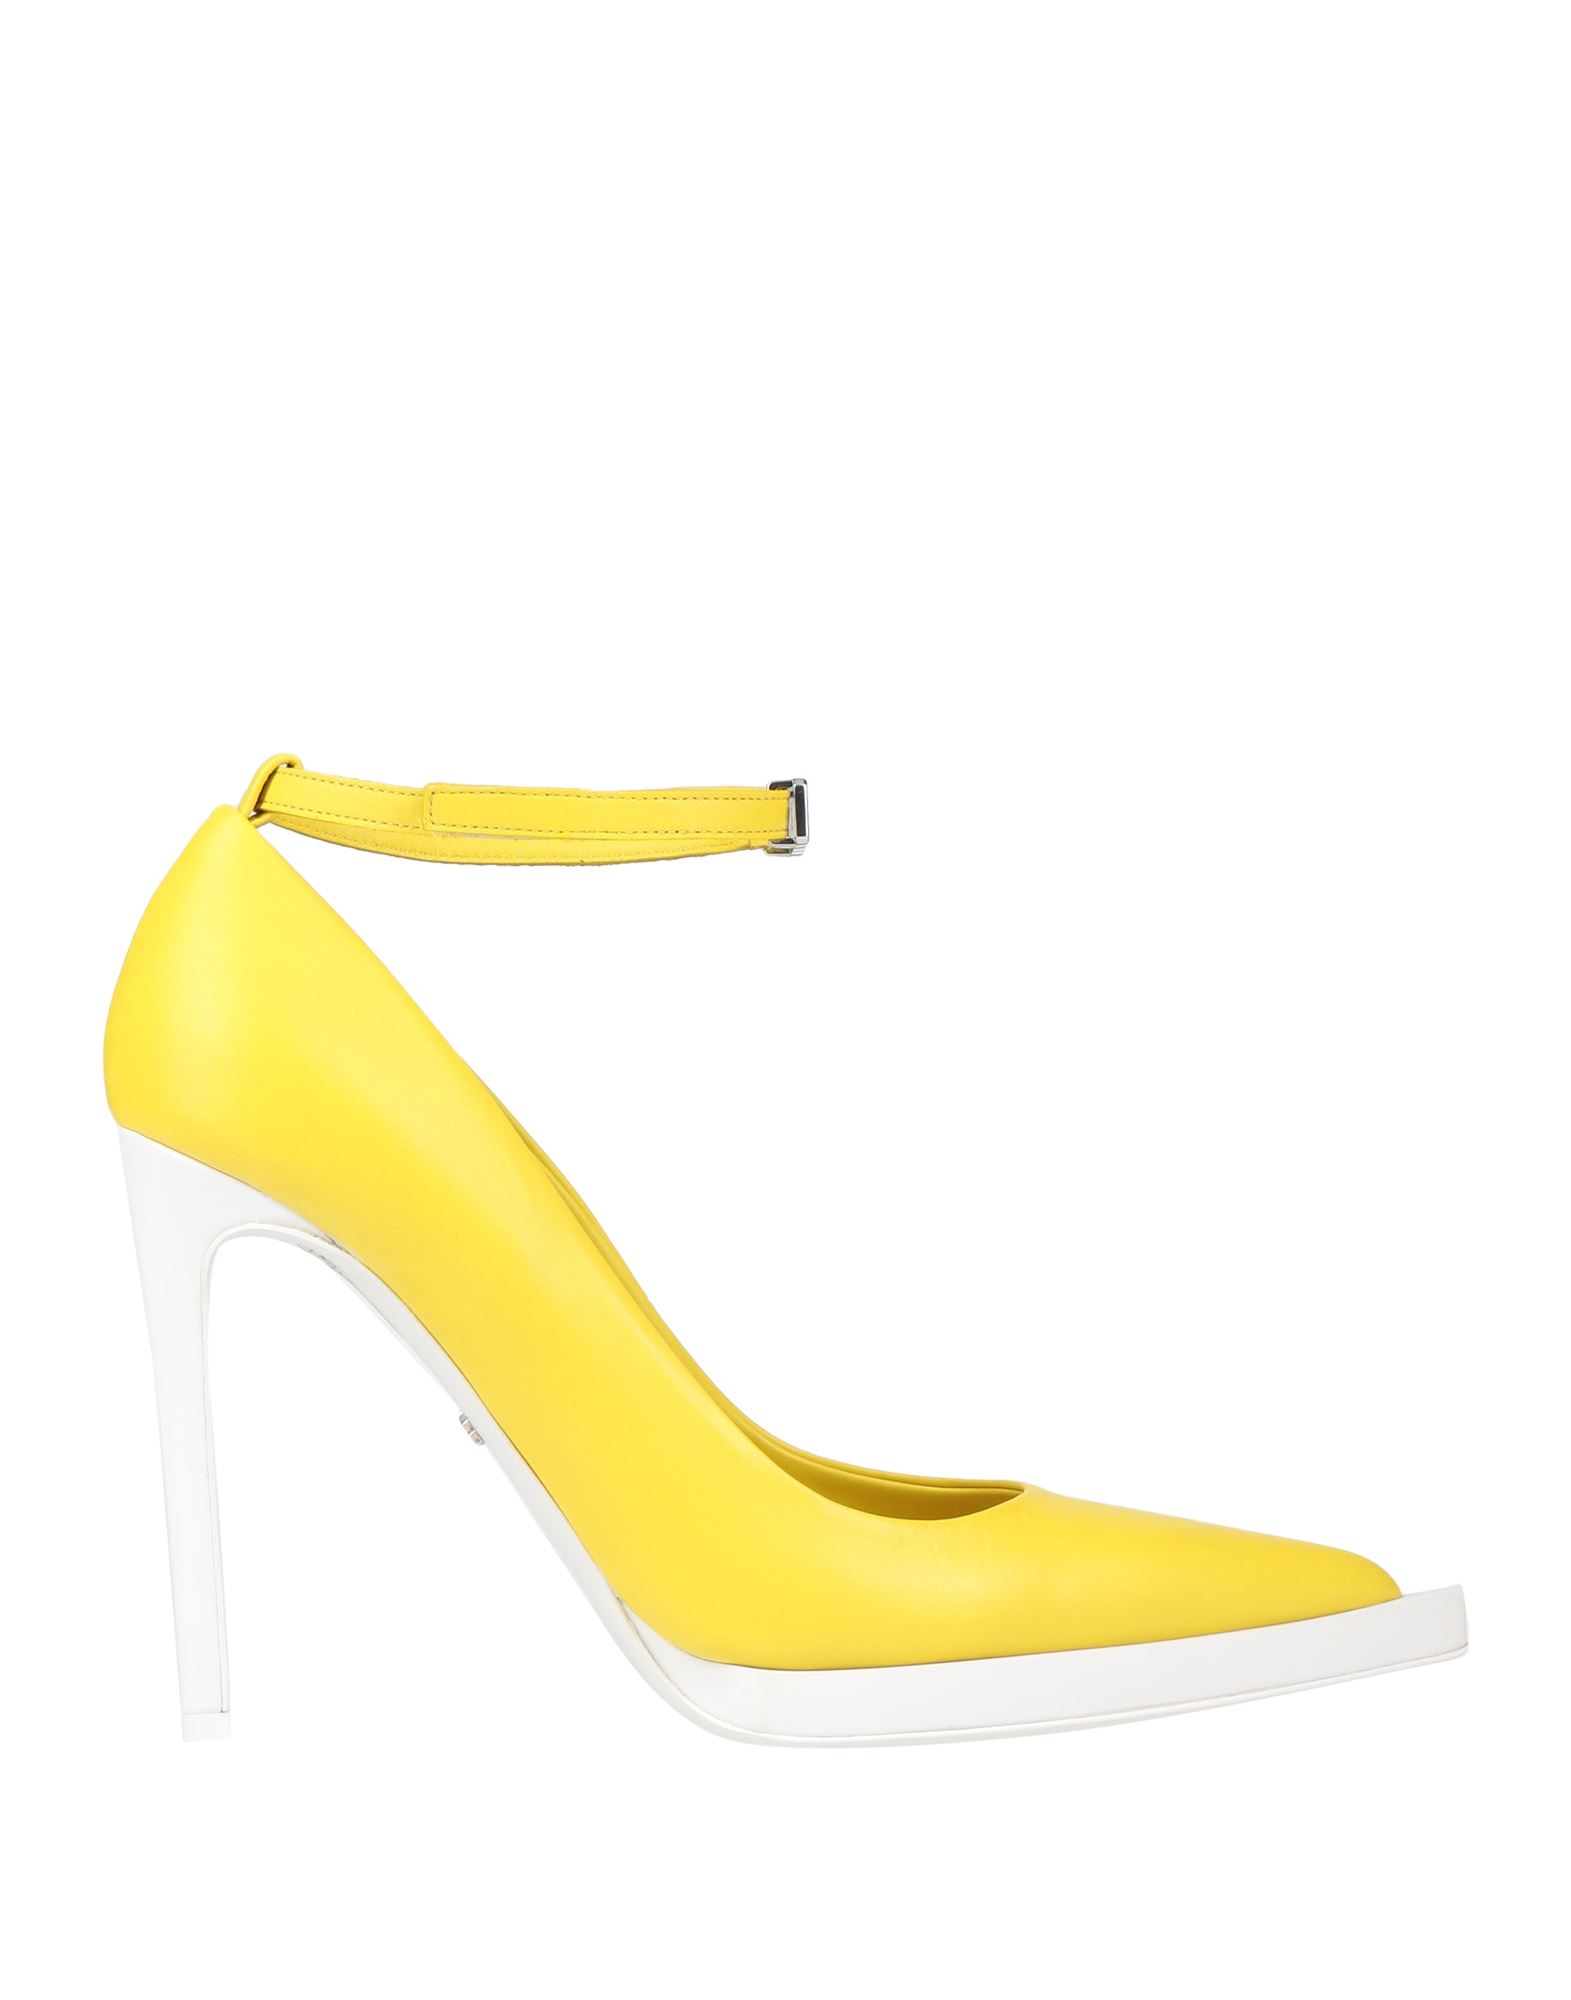 Gcds Pumps In Yellow